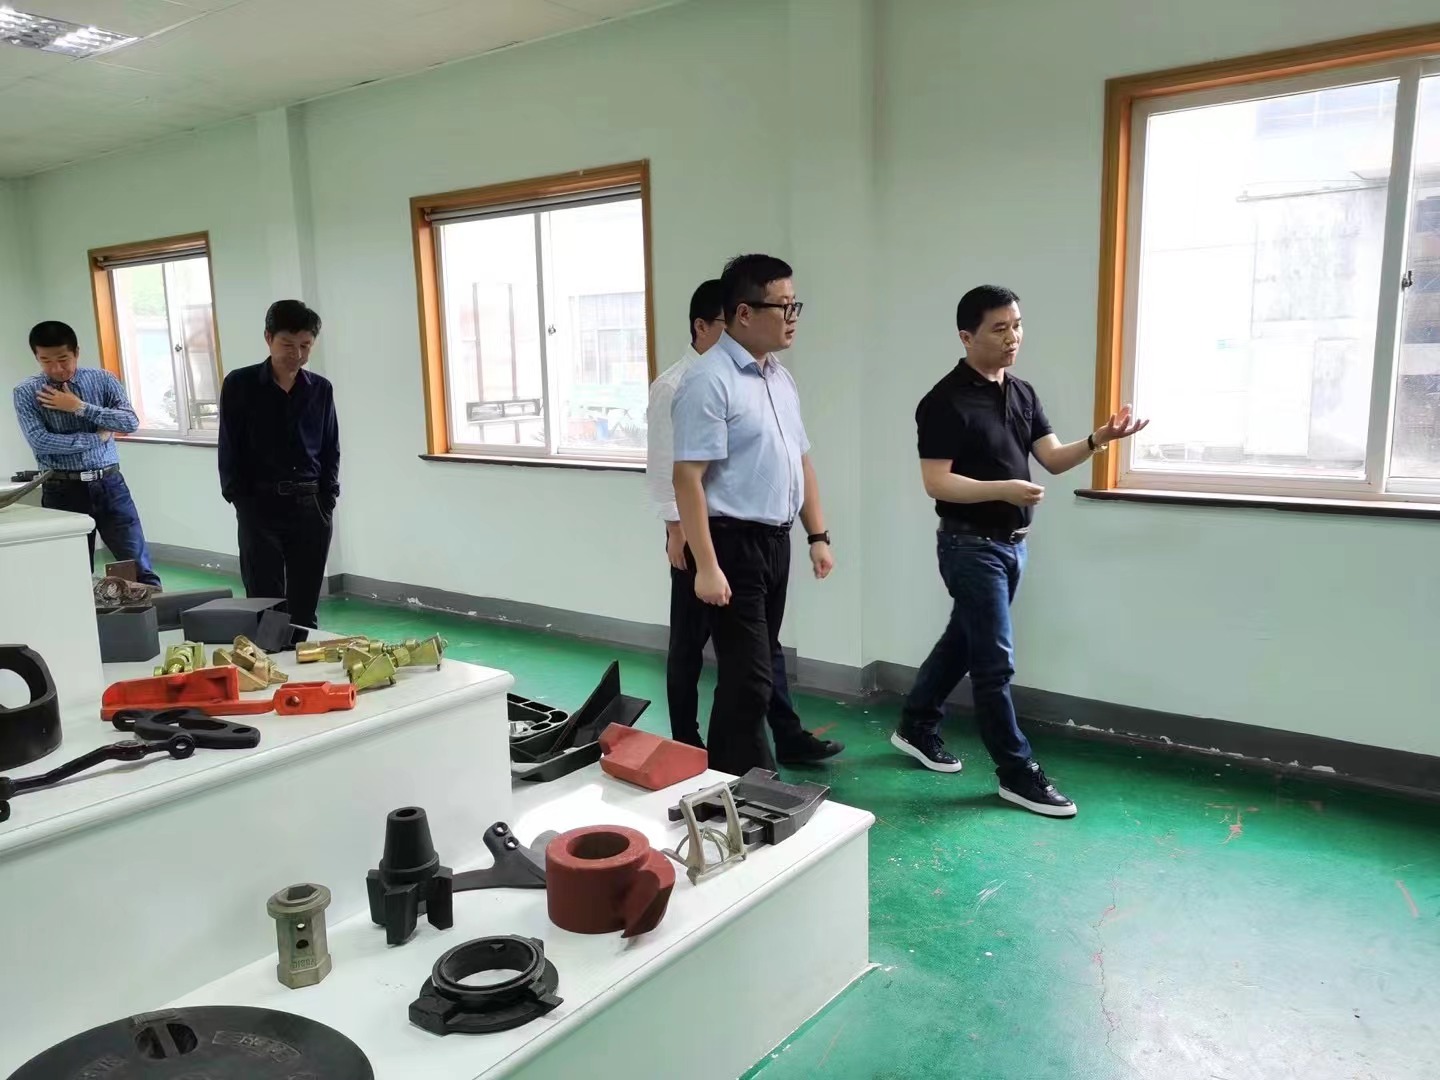 Peidong Wu, deputy head of Fenghua District, investigated Huawei Investment Casting Co., Ltd.